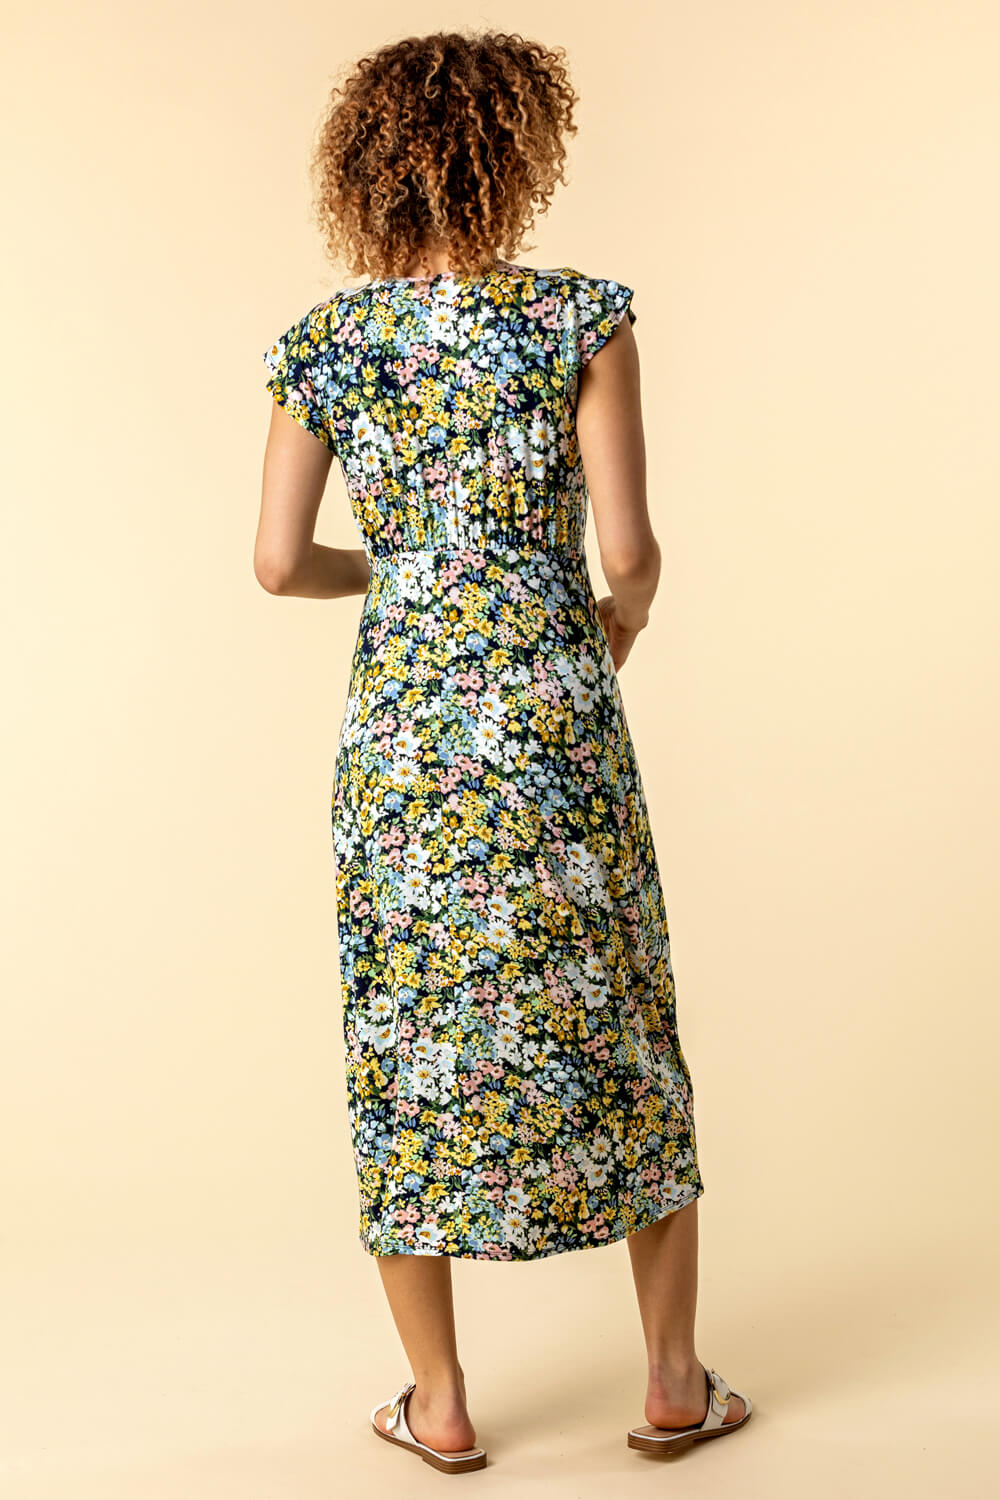 Multi  Floral Print Frill Sleeve Dress, Image 2 of 5